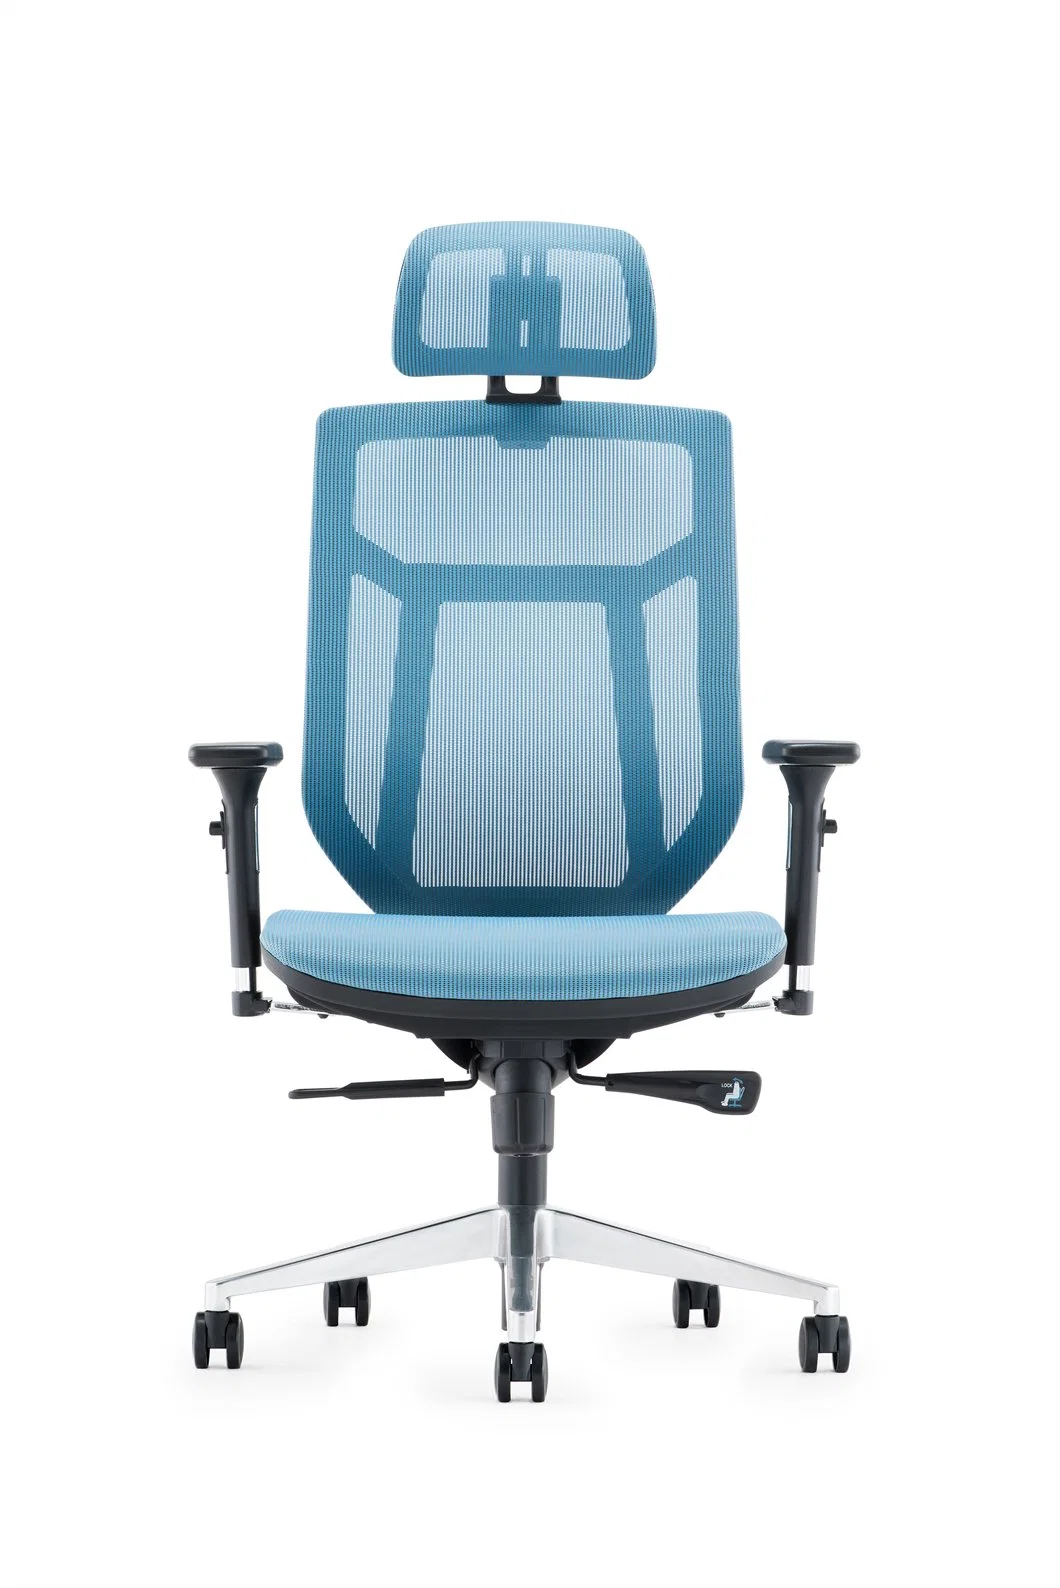 Special Mesh Ergonomic Mesh Fabric Office Chair Modern Computer Office Furniture Swivel Chairs with 3D Adjustable Armrest